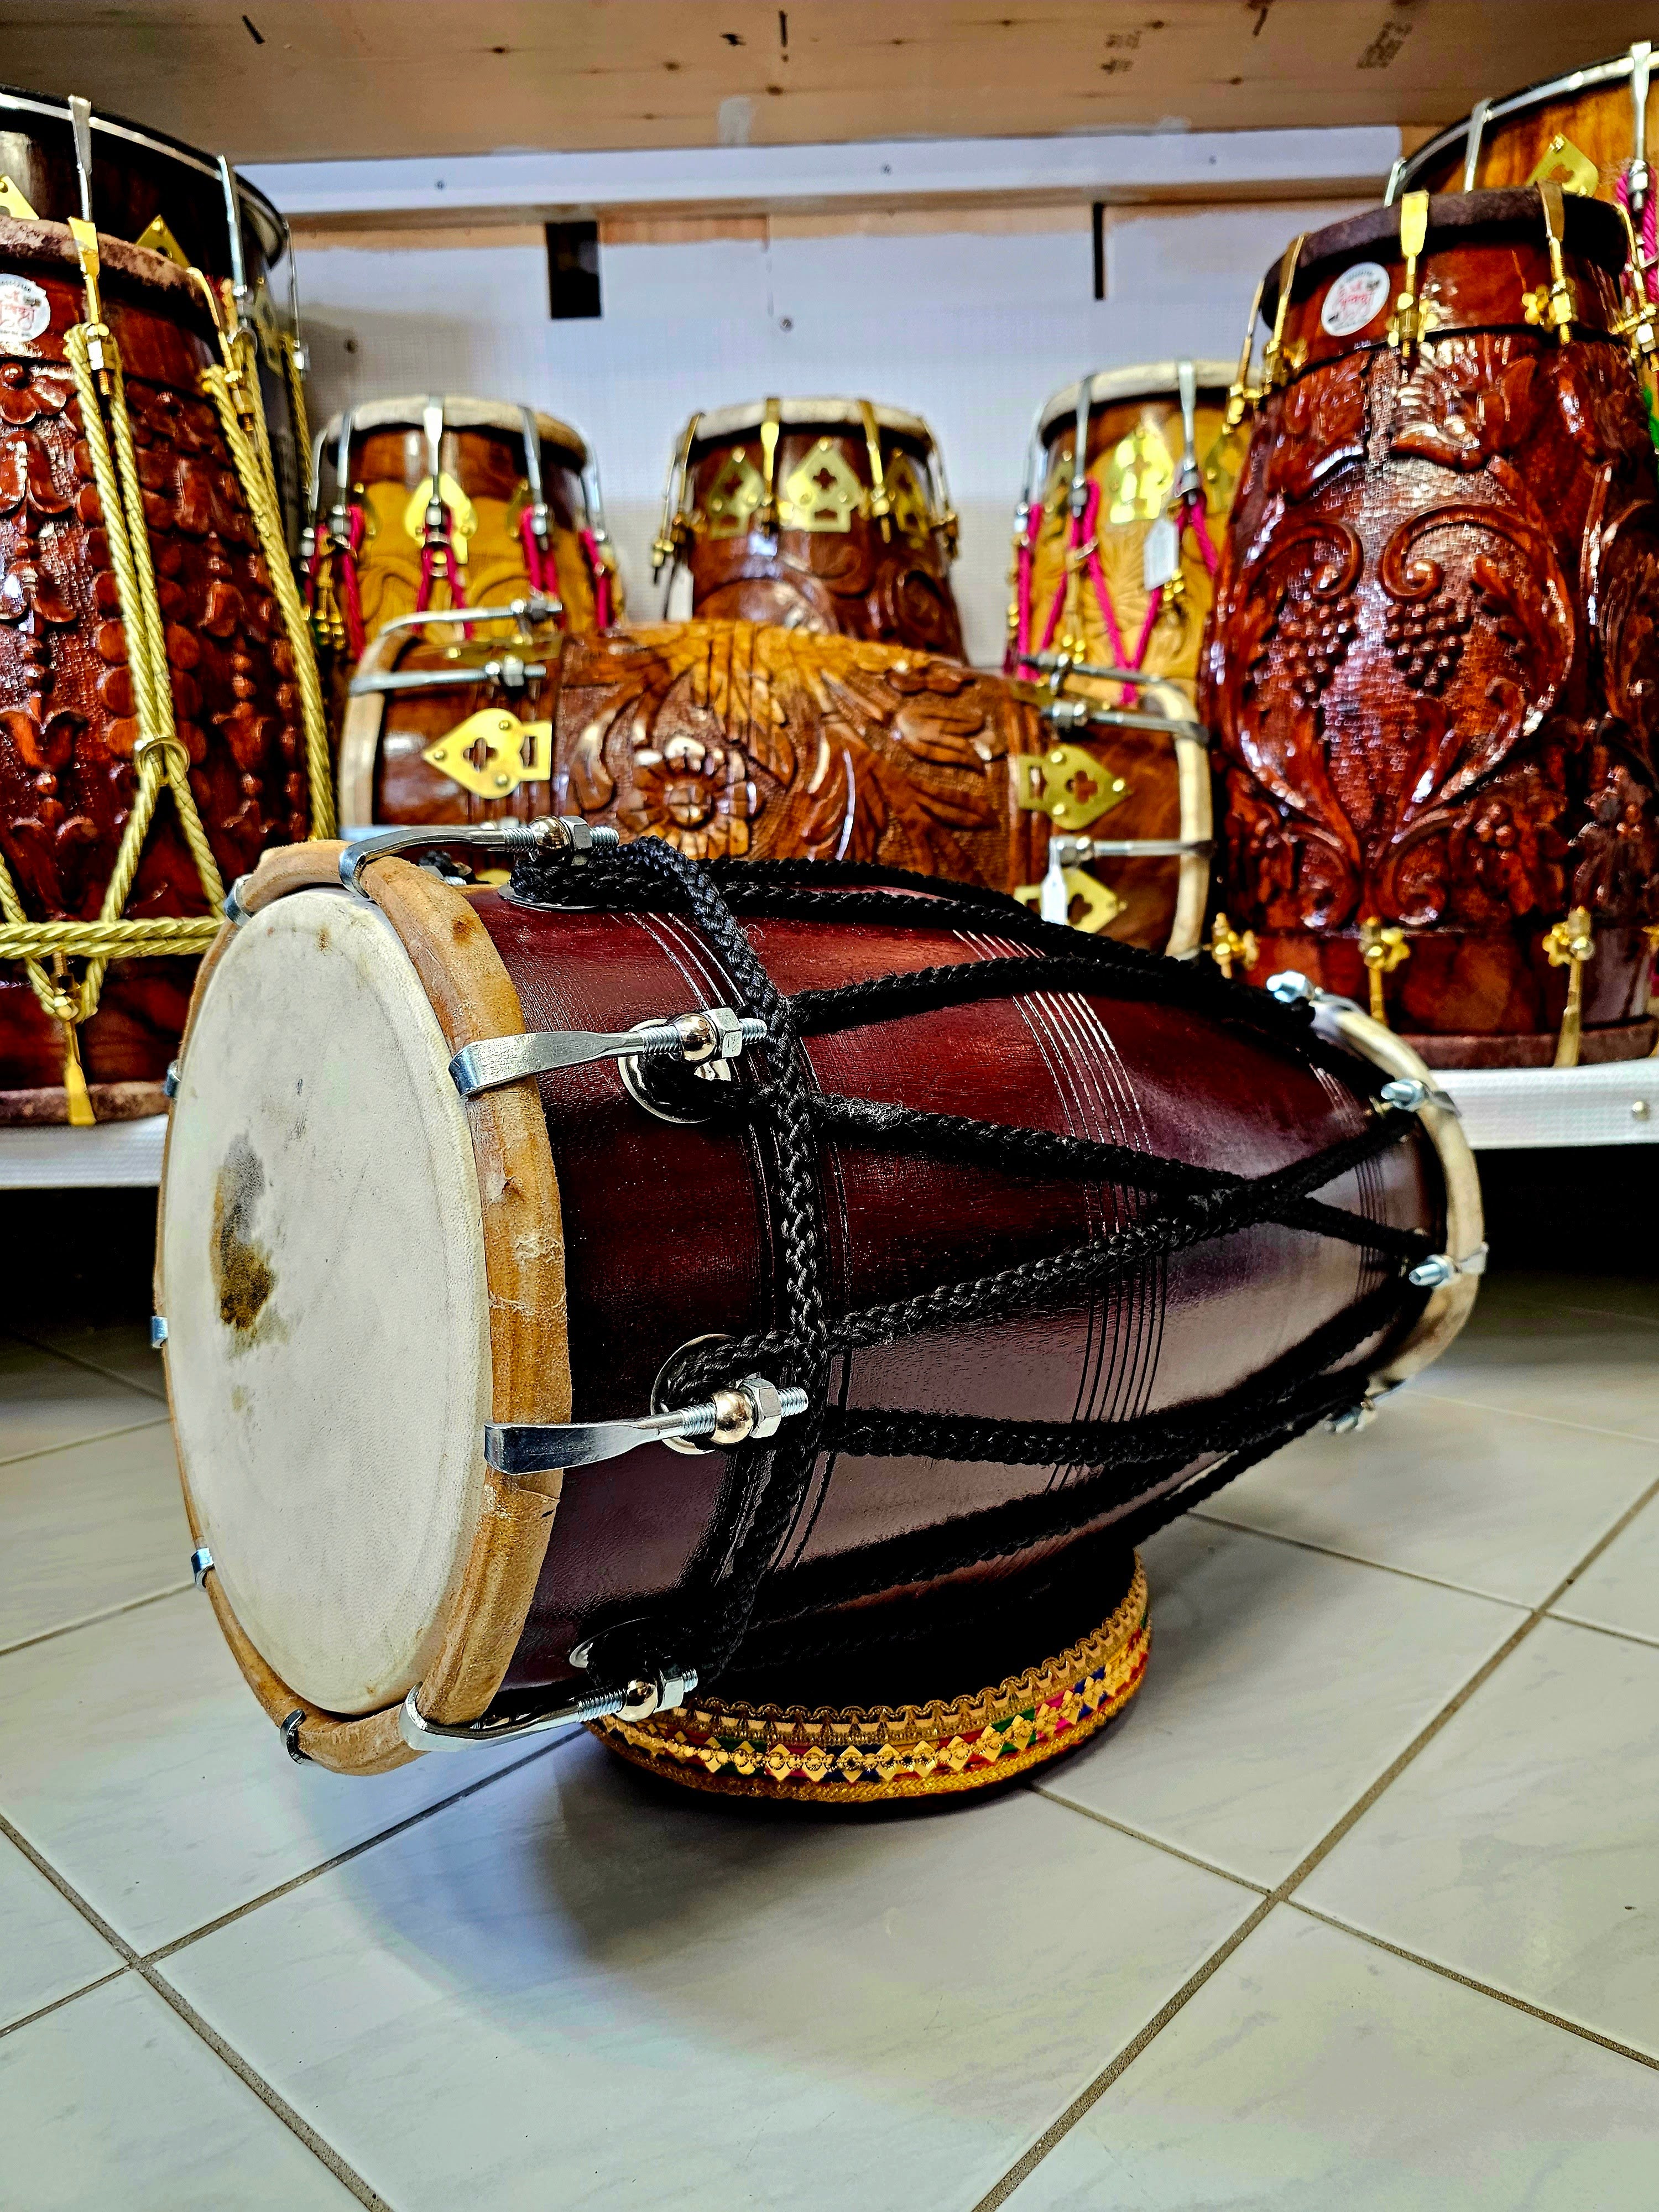 The Burgundy Premier Pro Dholak - A Professional Mango Wood Dholak with Black Ropes and Chrome Bolts!